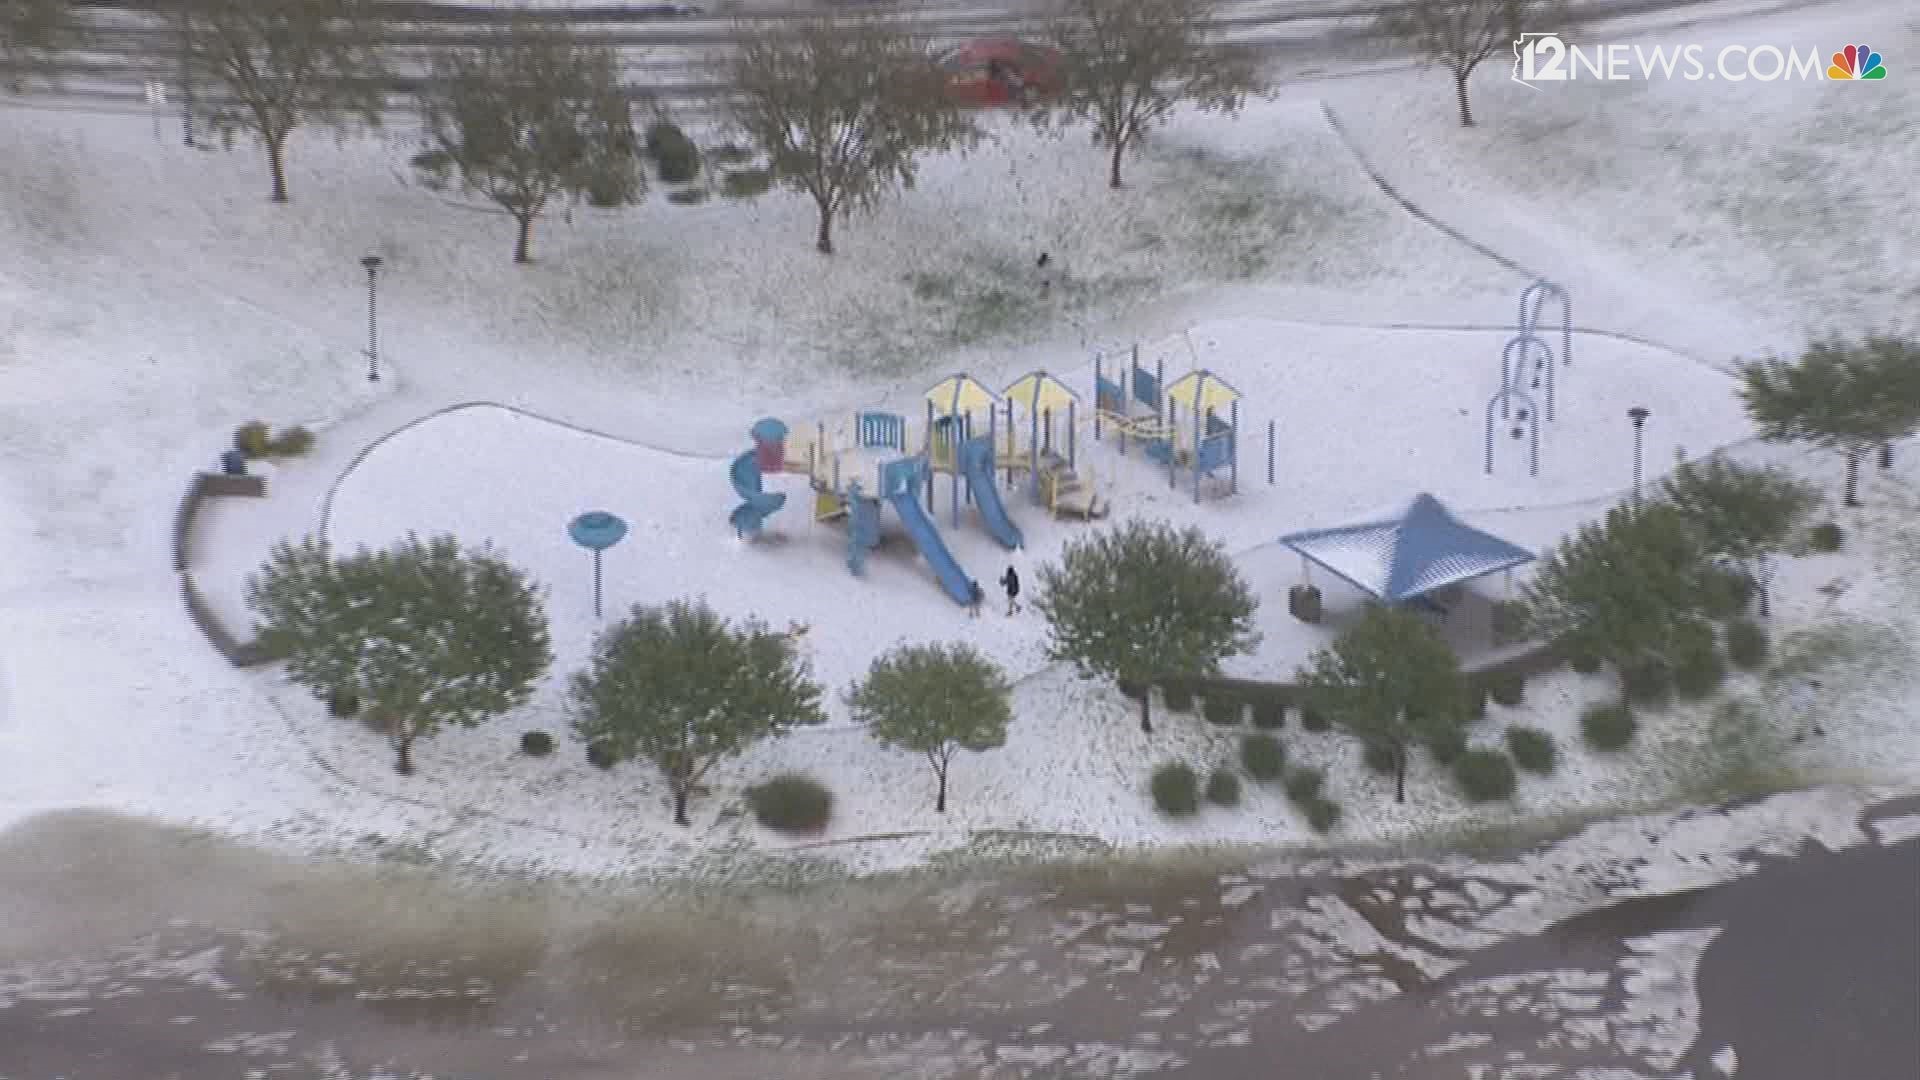 It looks like a winter wonderland in Goodyear. But that's not snow you see, it's a blanket of hail!